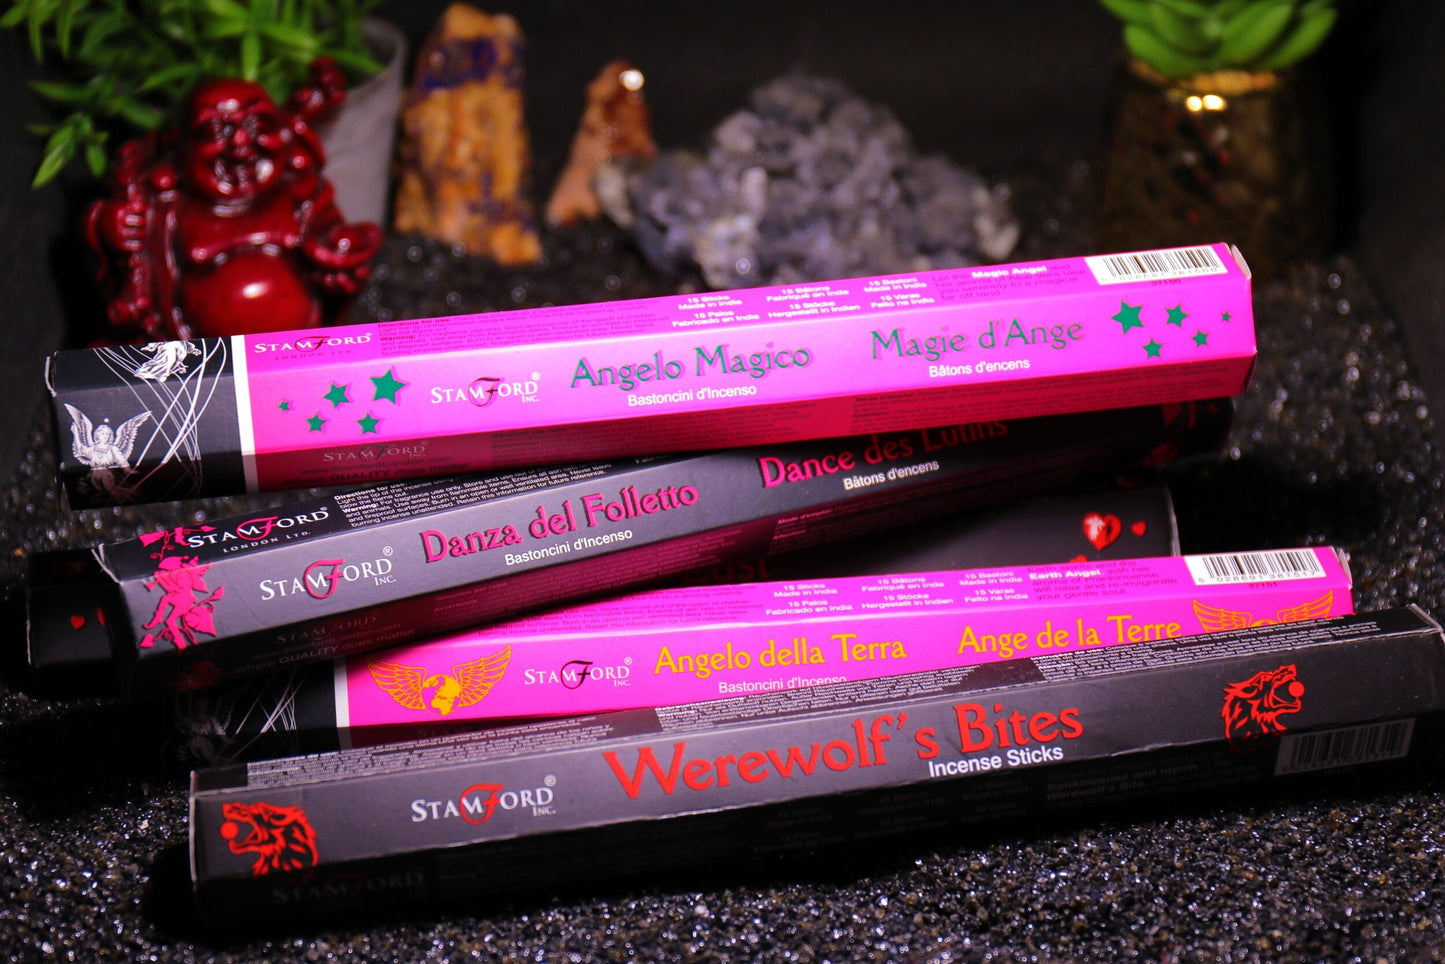 Stamford Mythical and Angel Selection Incense 15 sticks